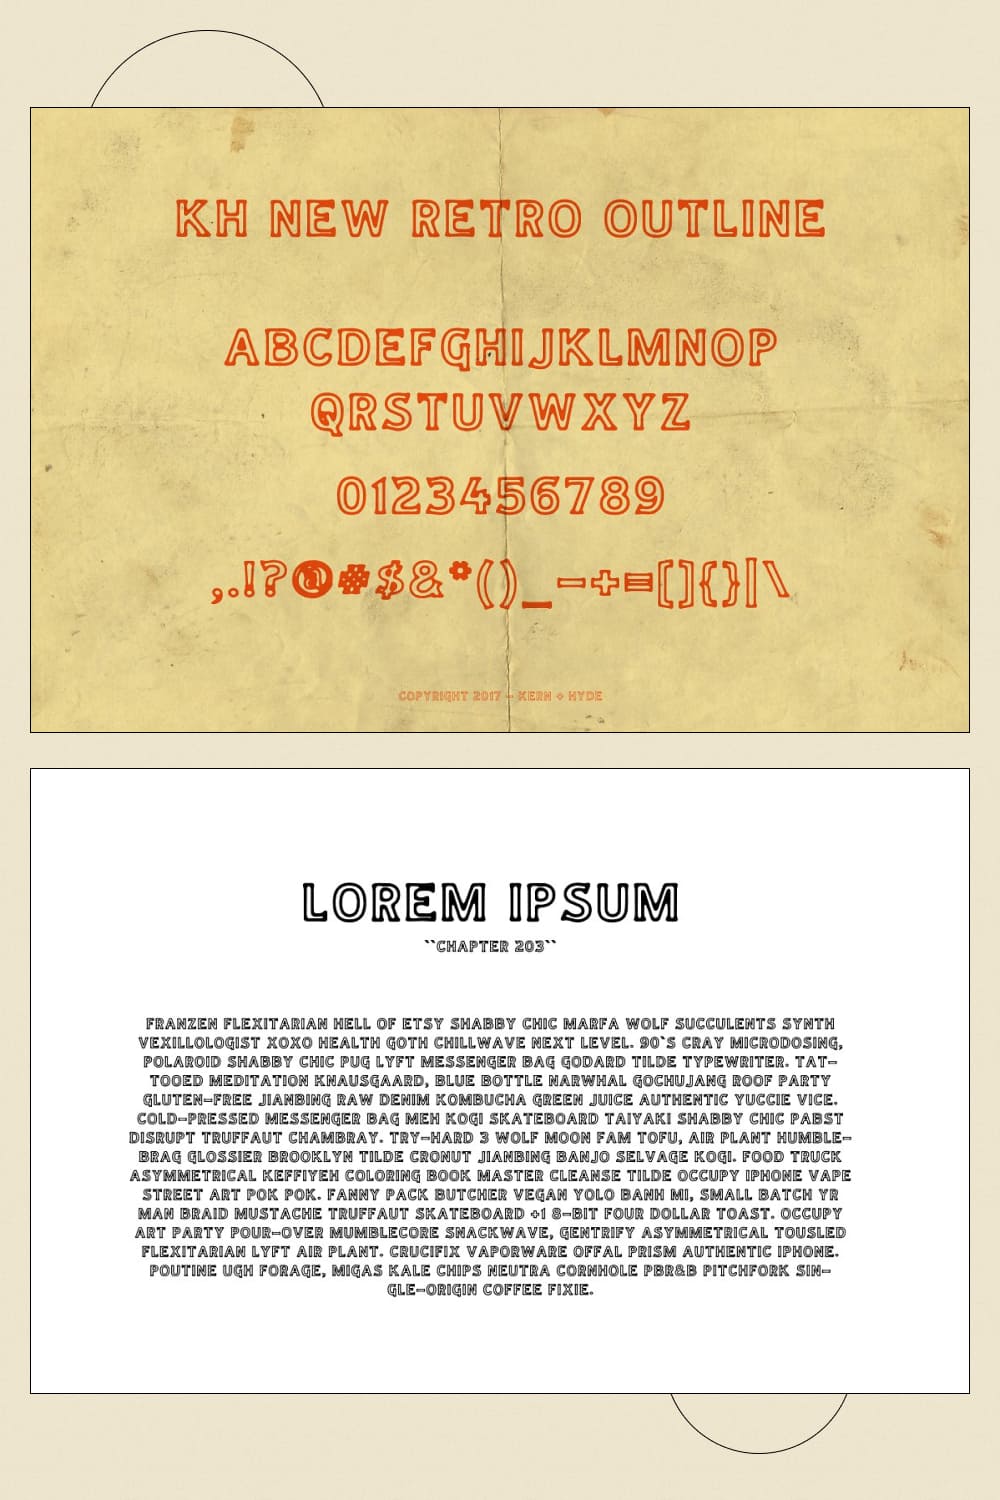 KH New Retro Outline Preview And Lorem Ipsum Text.